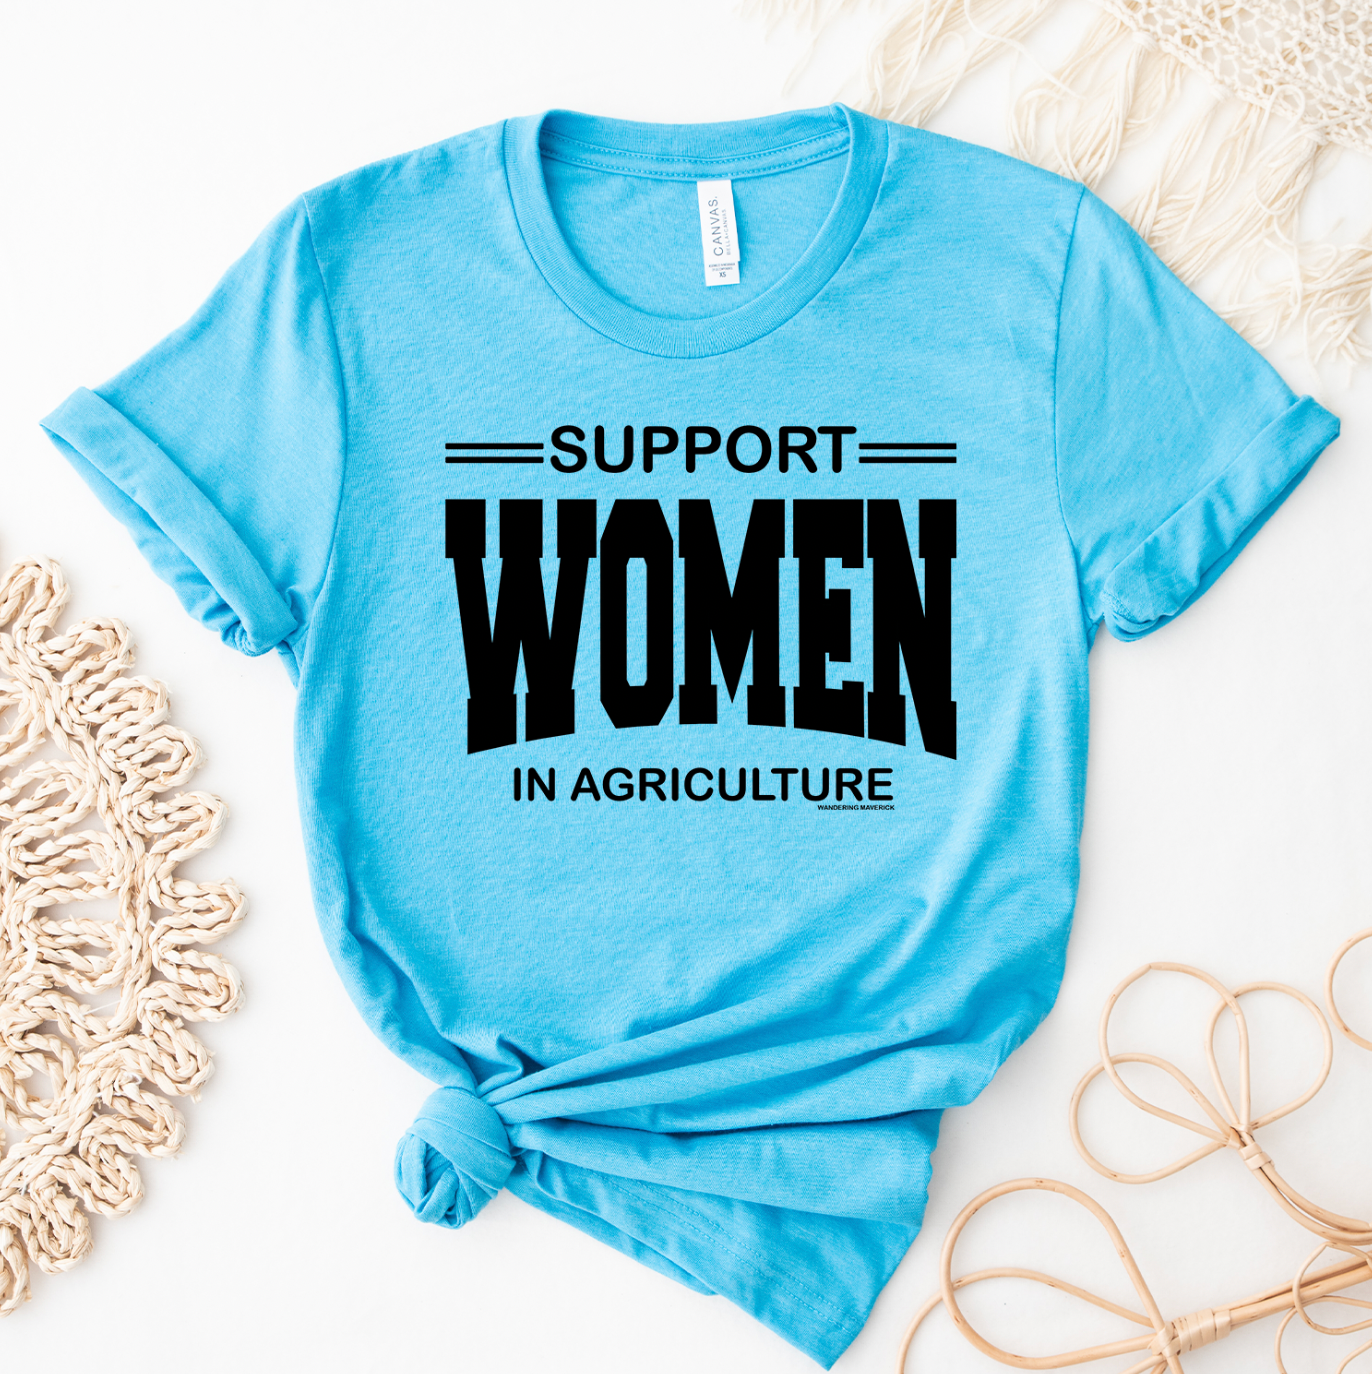 Support Women In Agriculture Black Ink T-Shirt (XS-4XL) - Multiple Colors!